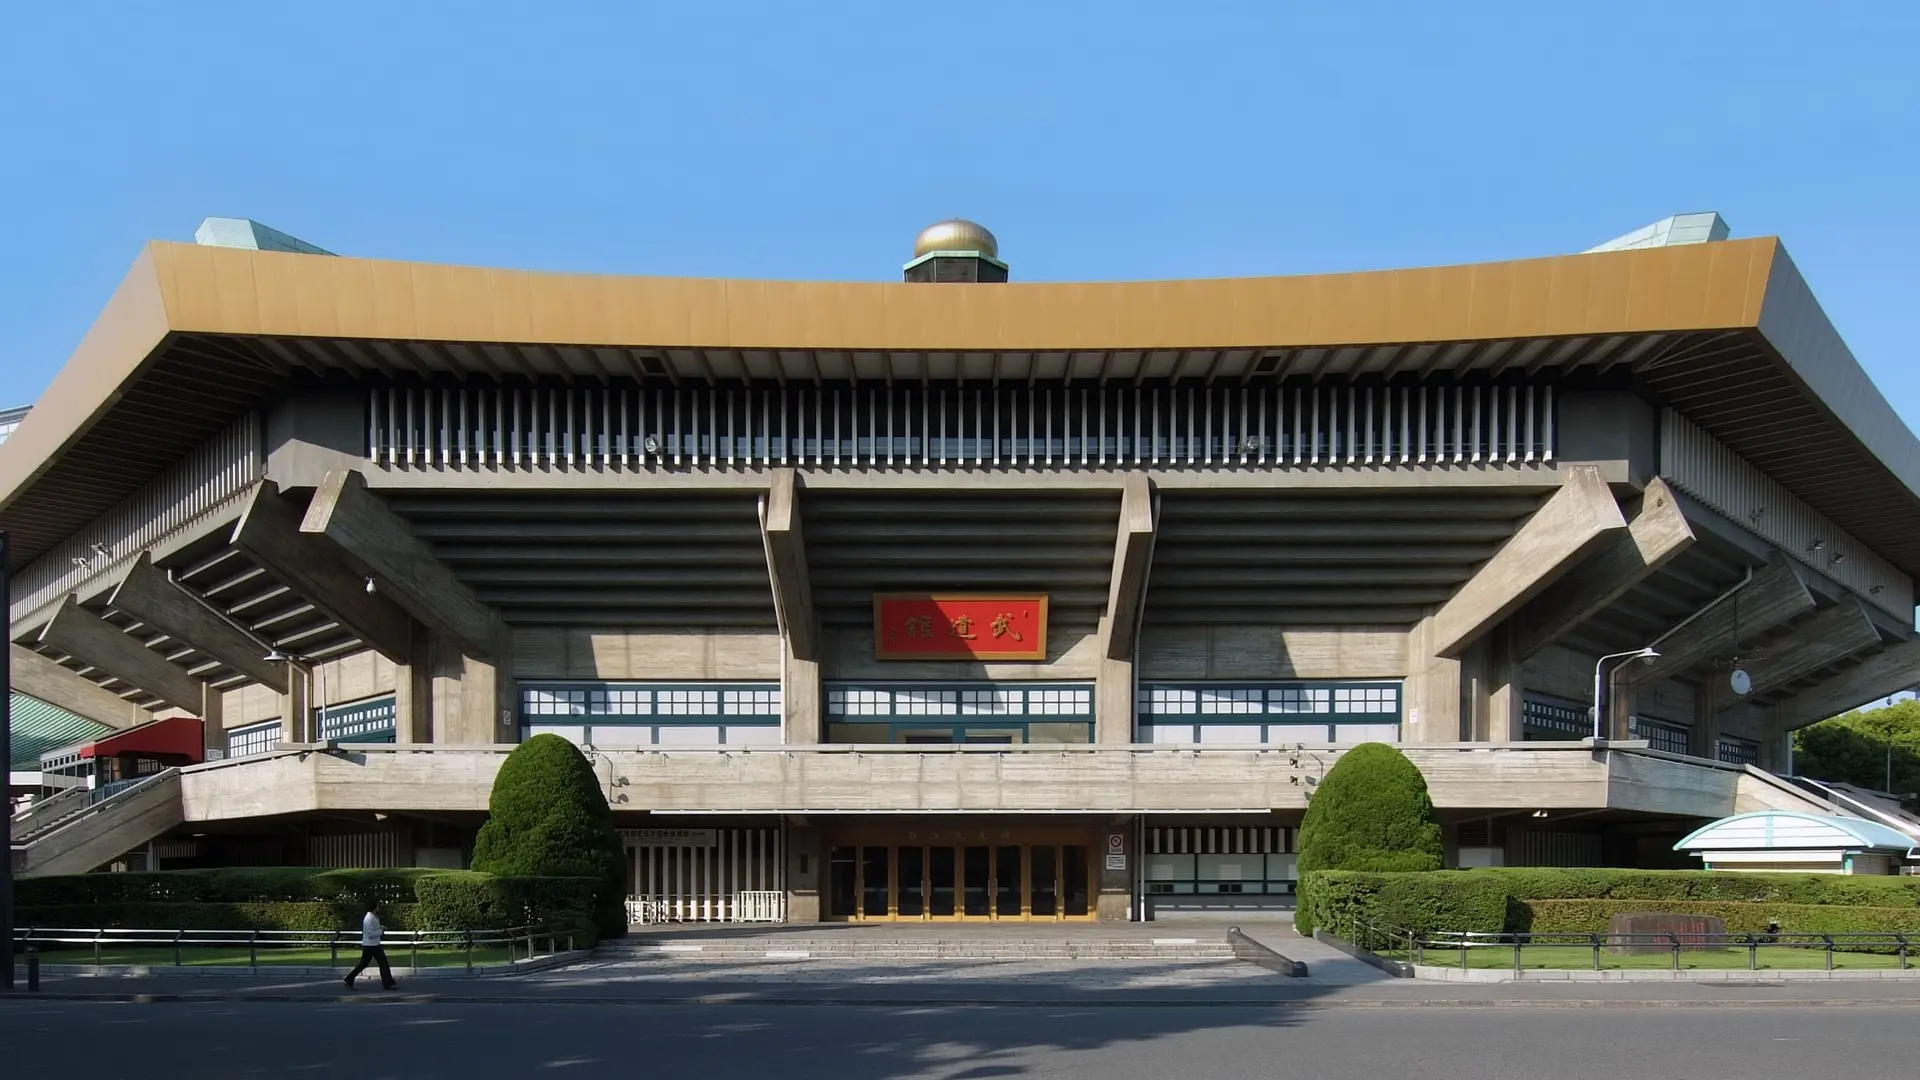 Futuristic temple looking building with red box in chineese The Tokyo Budokan.